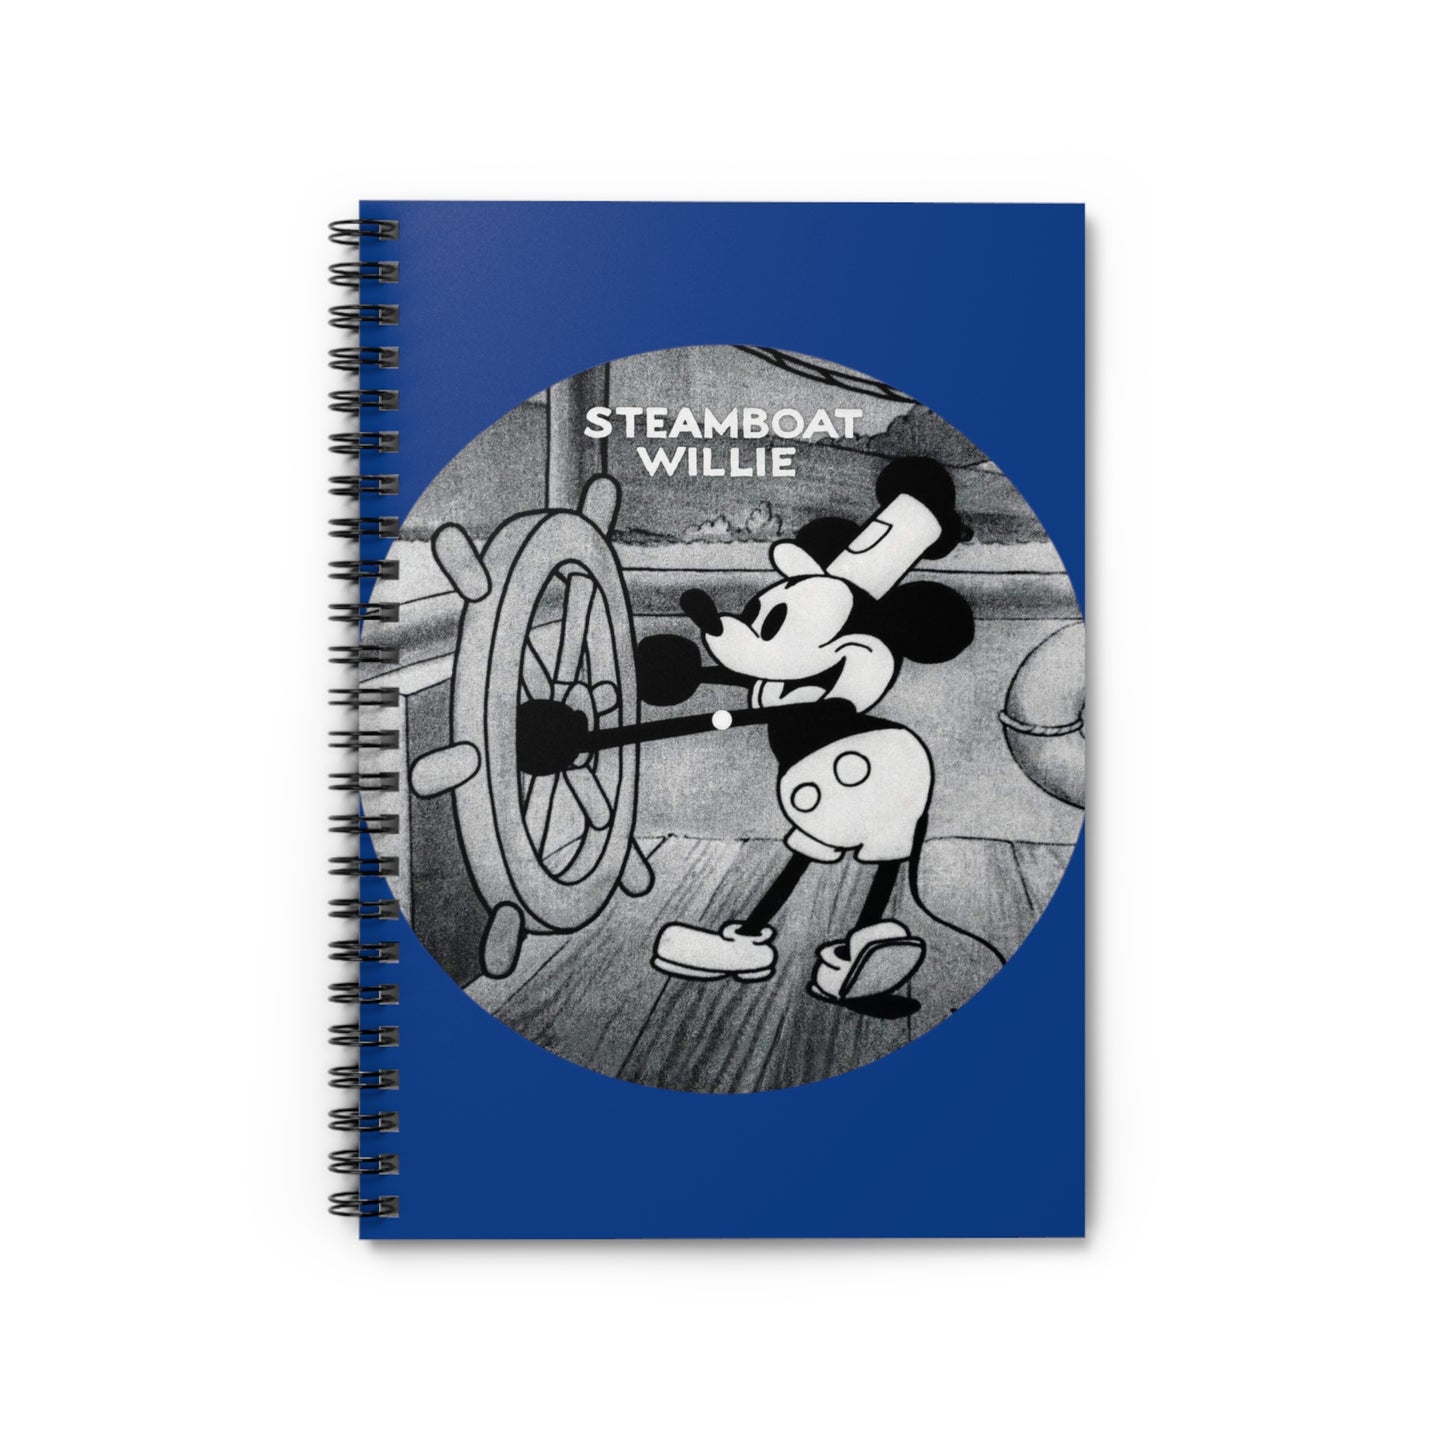 "Steamboat Willie" Blue Spiral Notebook - Ruled Line, 118 Ruled Line Pages, Perfect for Journaling, School, Office, Notes, Etc.